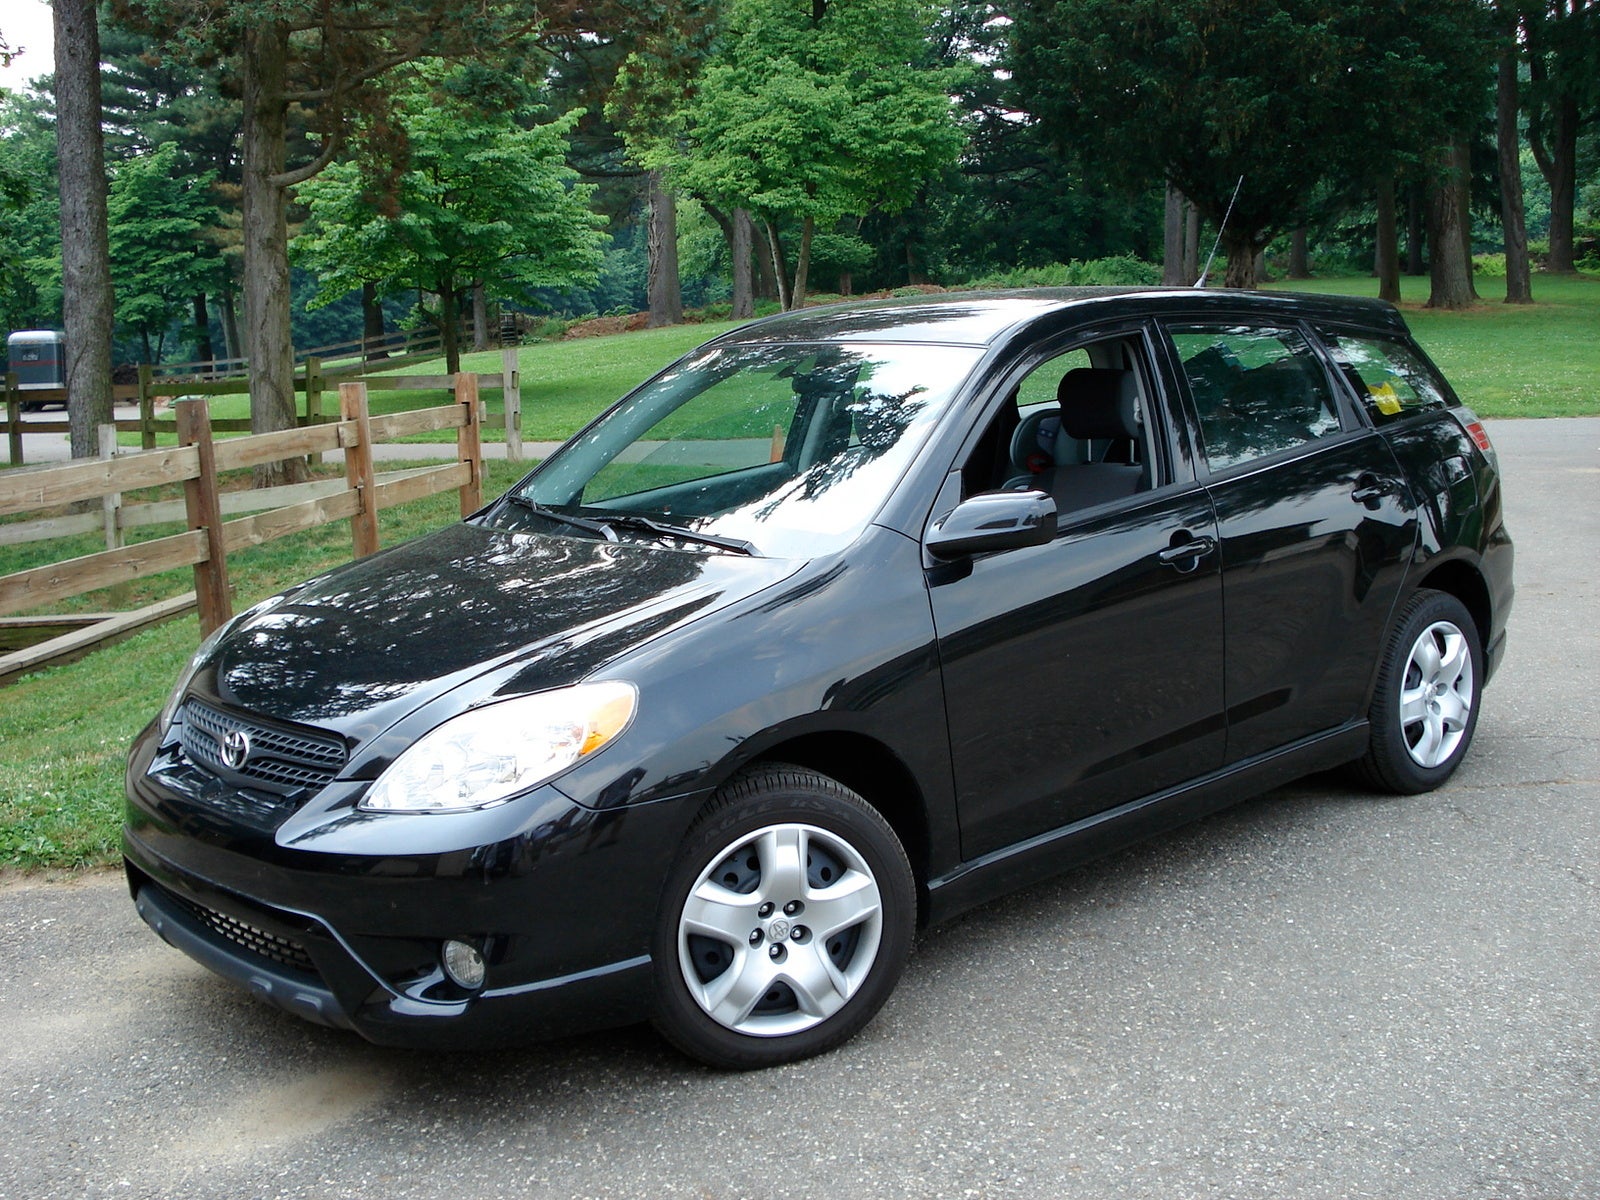 2007 Toyota Matrix with tire size that will blow your mind